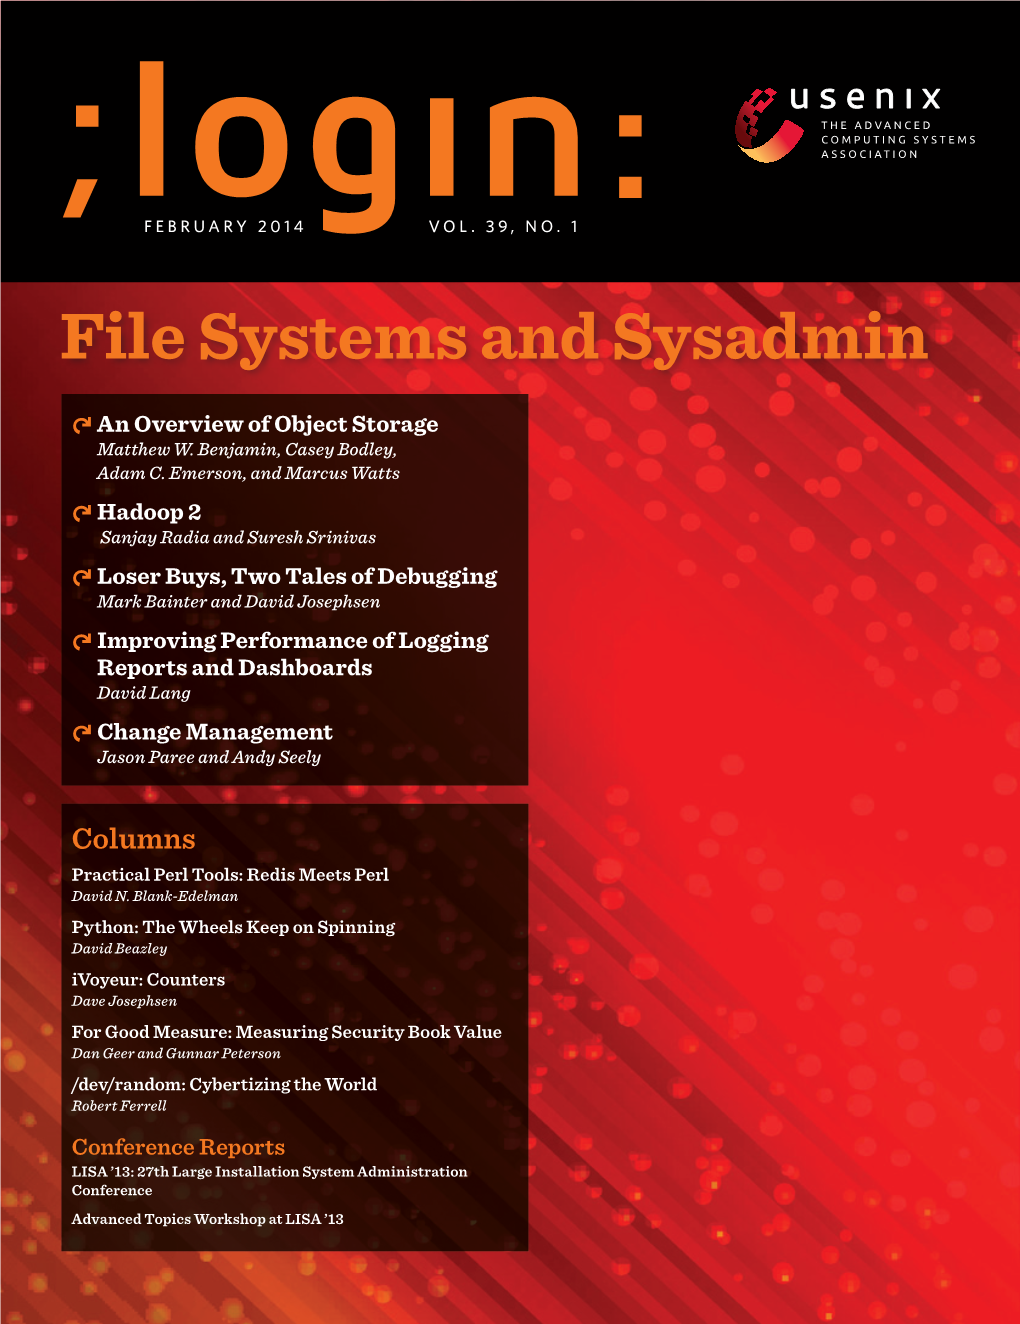 File Systems and Sysadmin